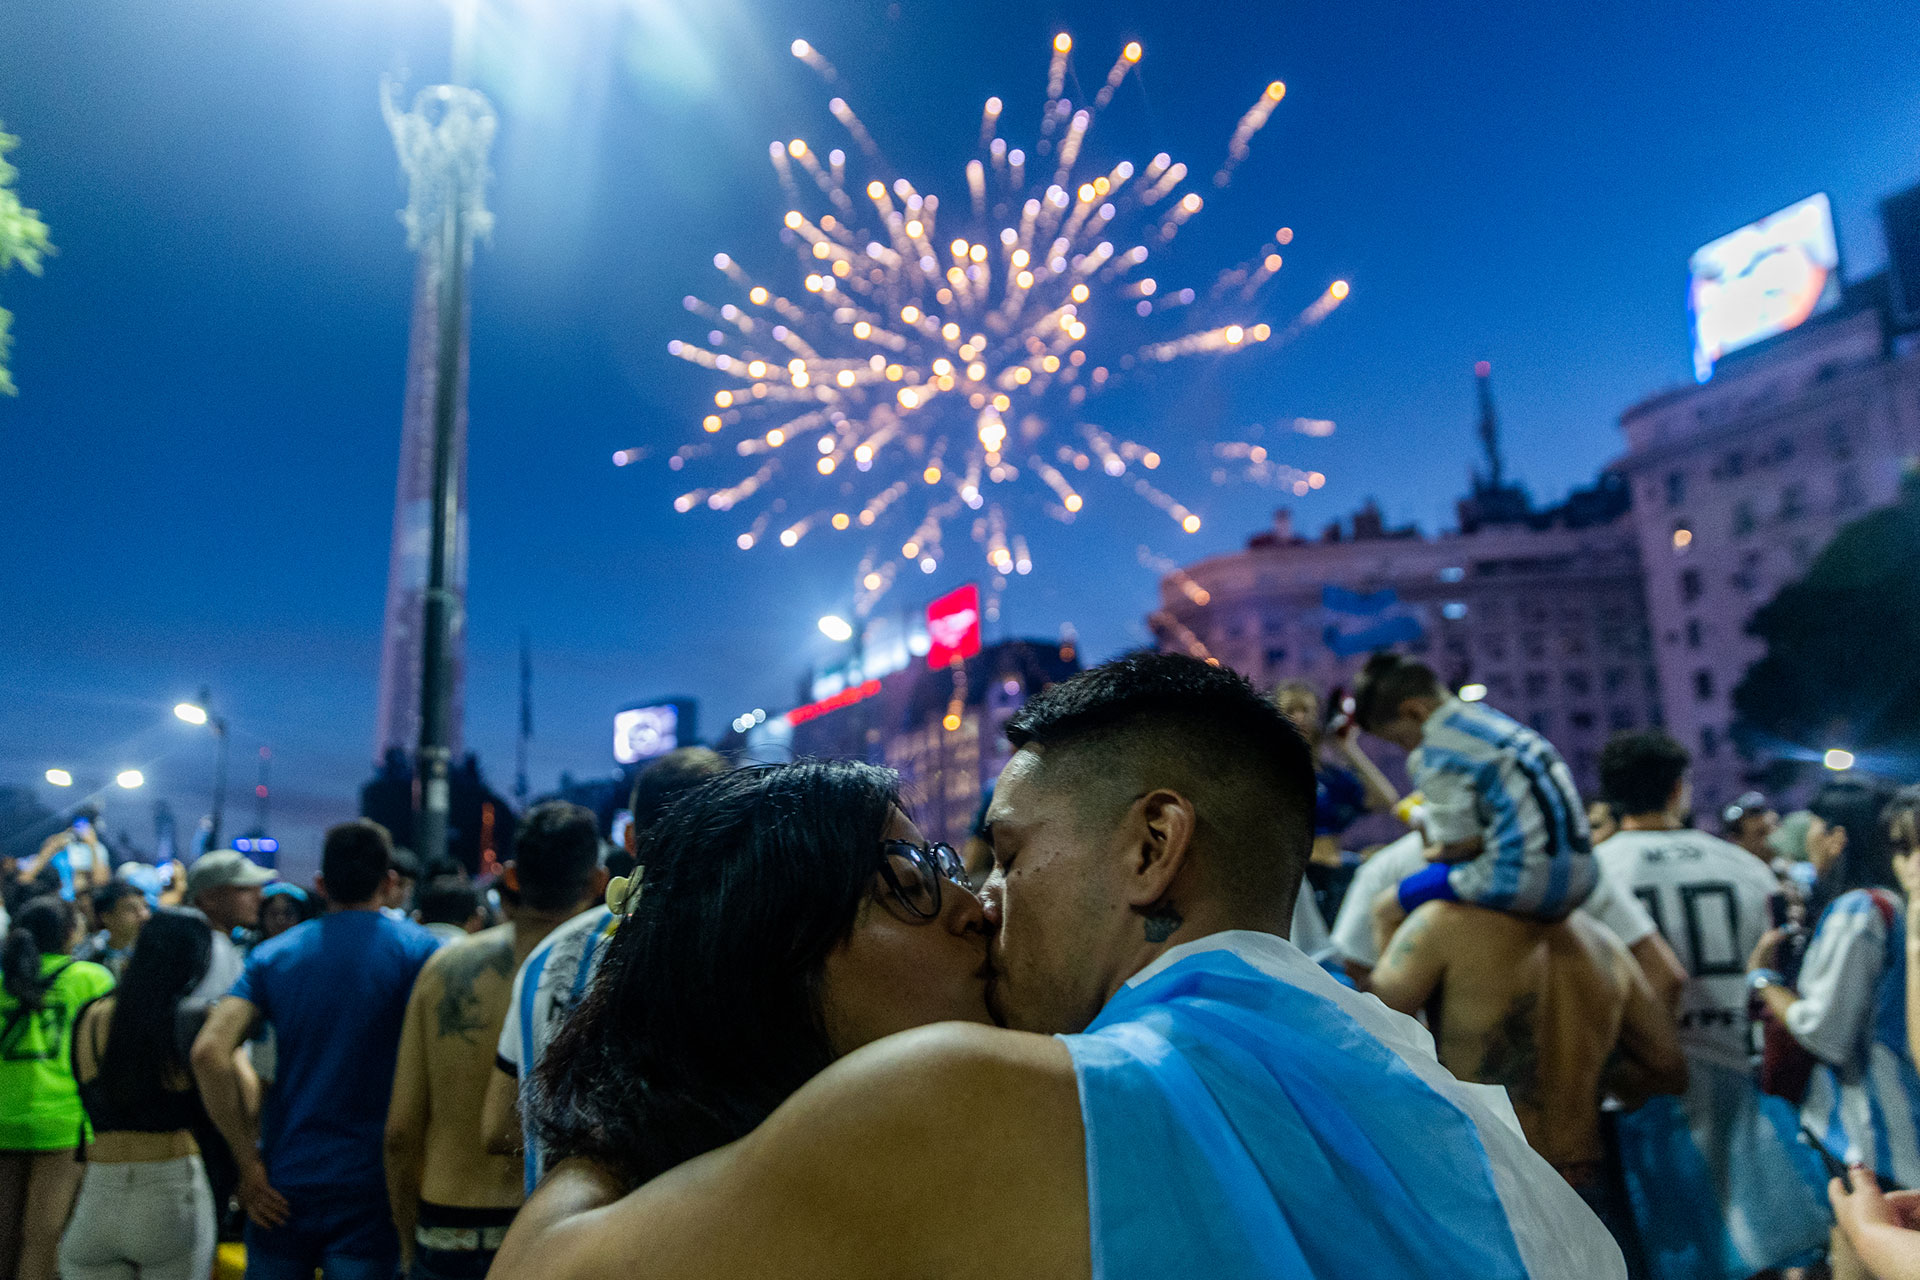 Fans of Argentina celebrate winning the Qatar 2022 World Cup against France at the Obelisk  in Buenos Aires, on December 18, 2022. (Photo by TOMAS CUESTA / AFP)